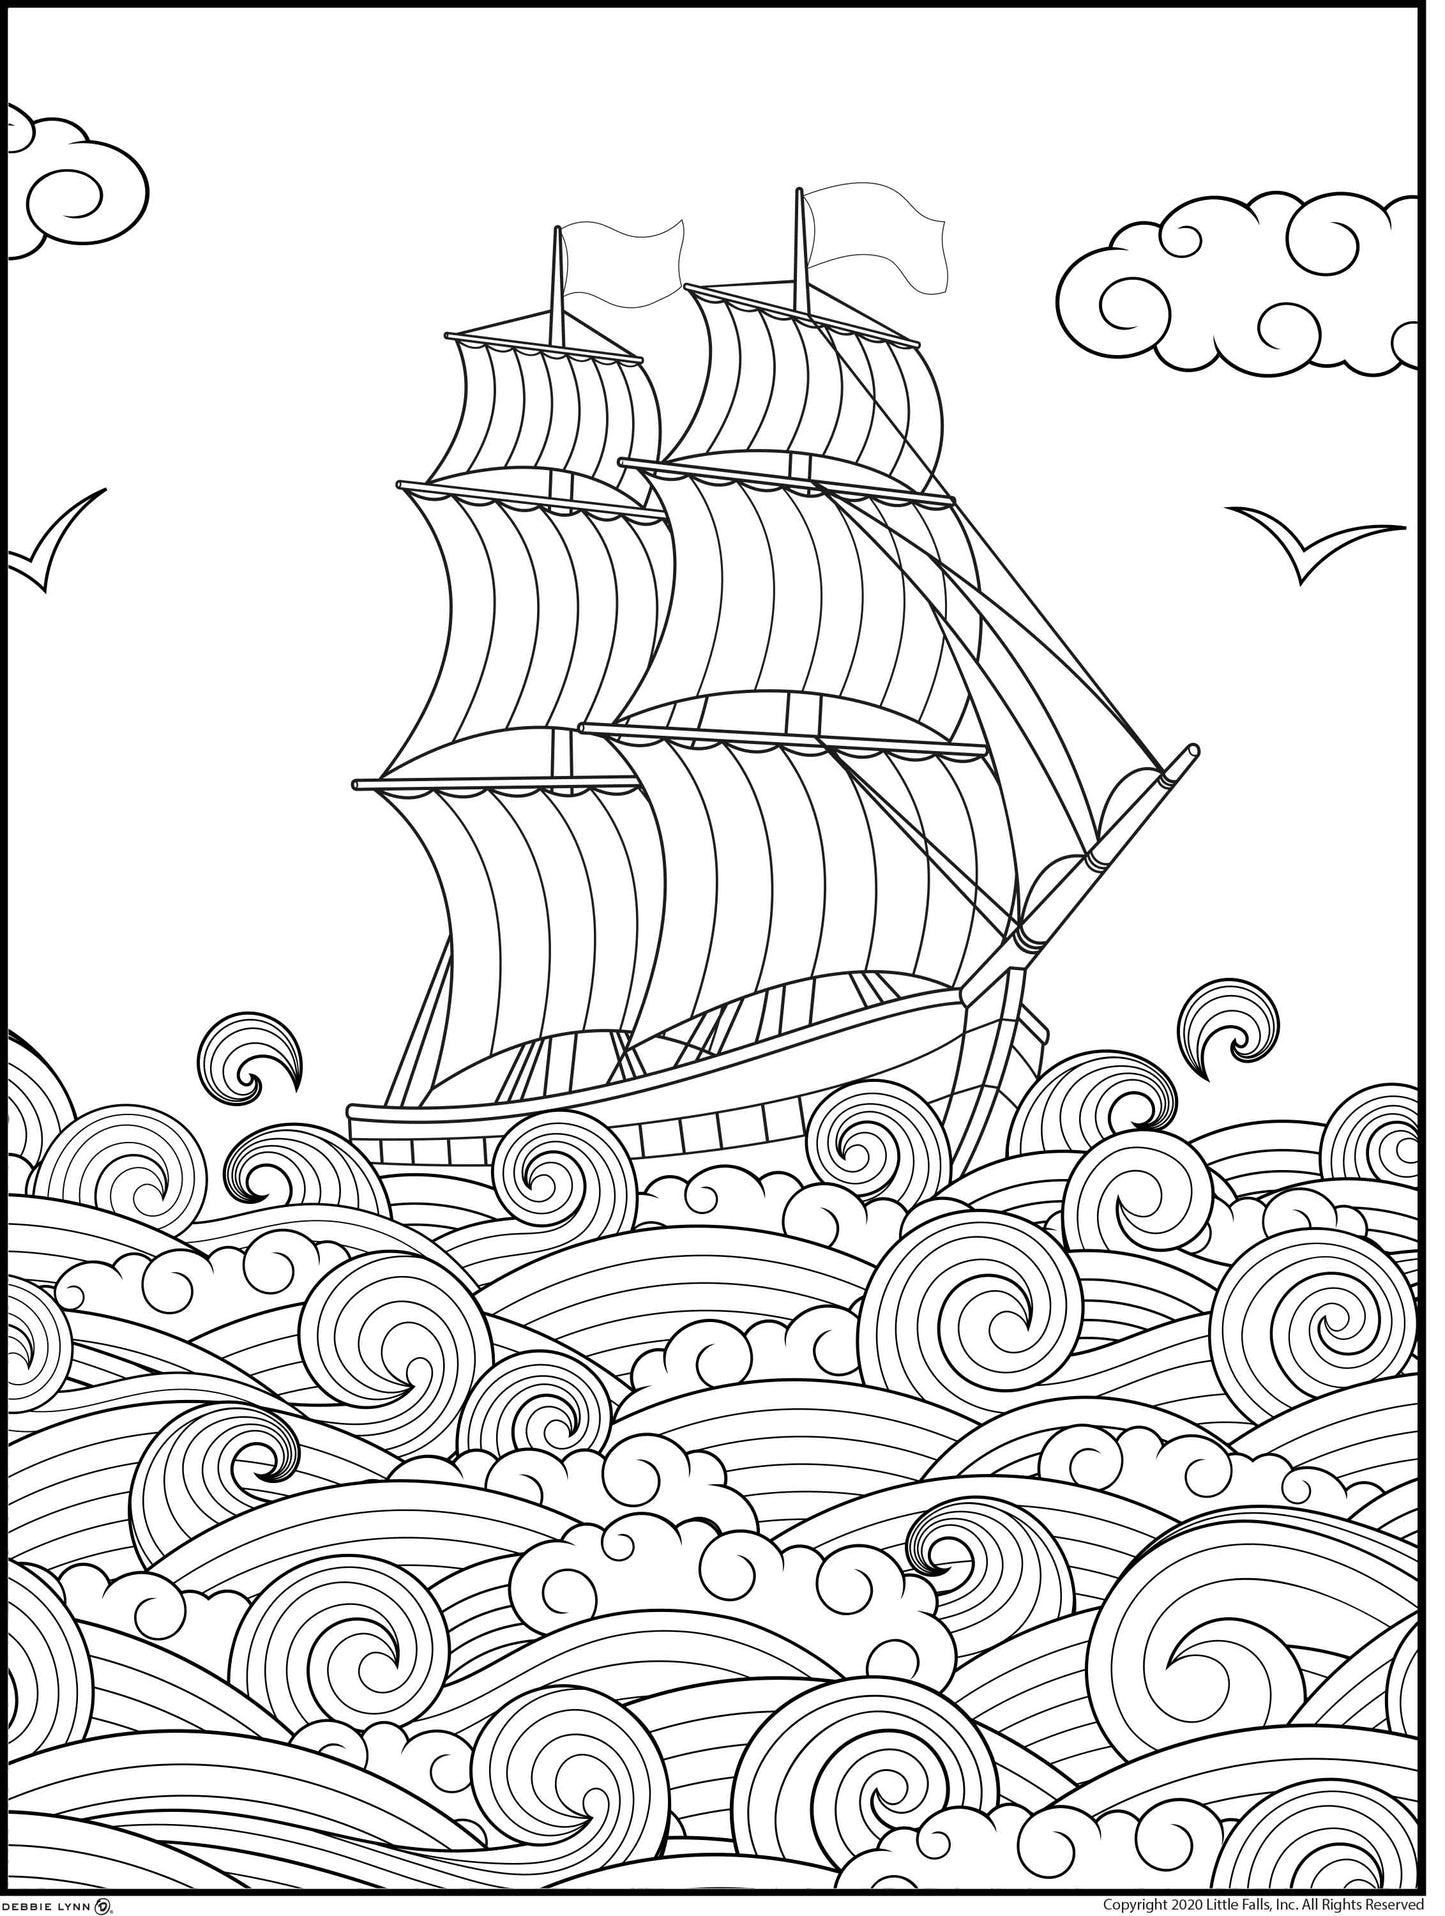 Boat Personalized Giant Coloring Poster 46"x60"